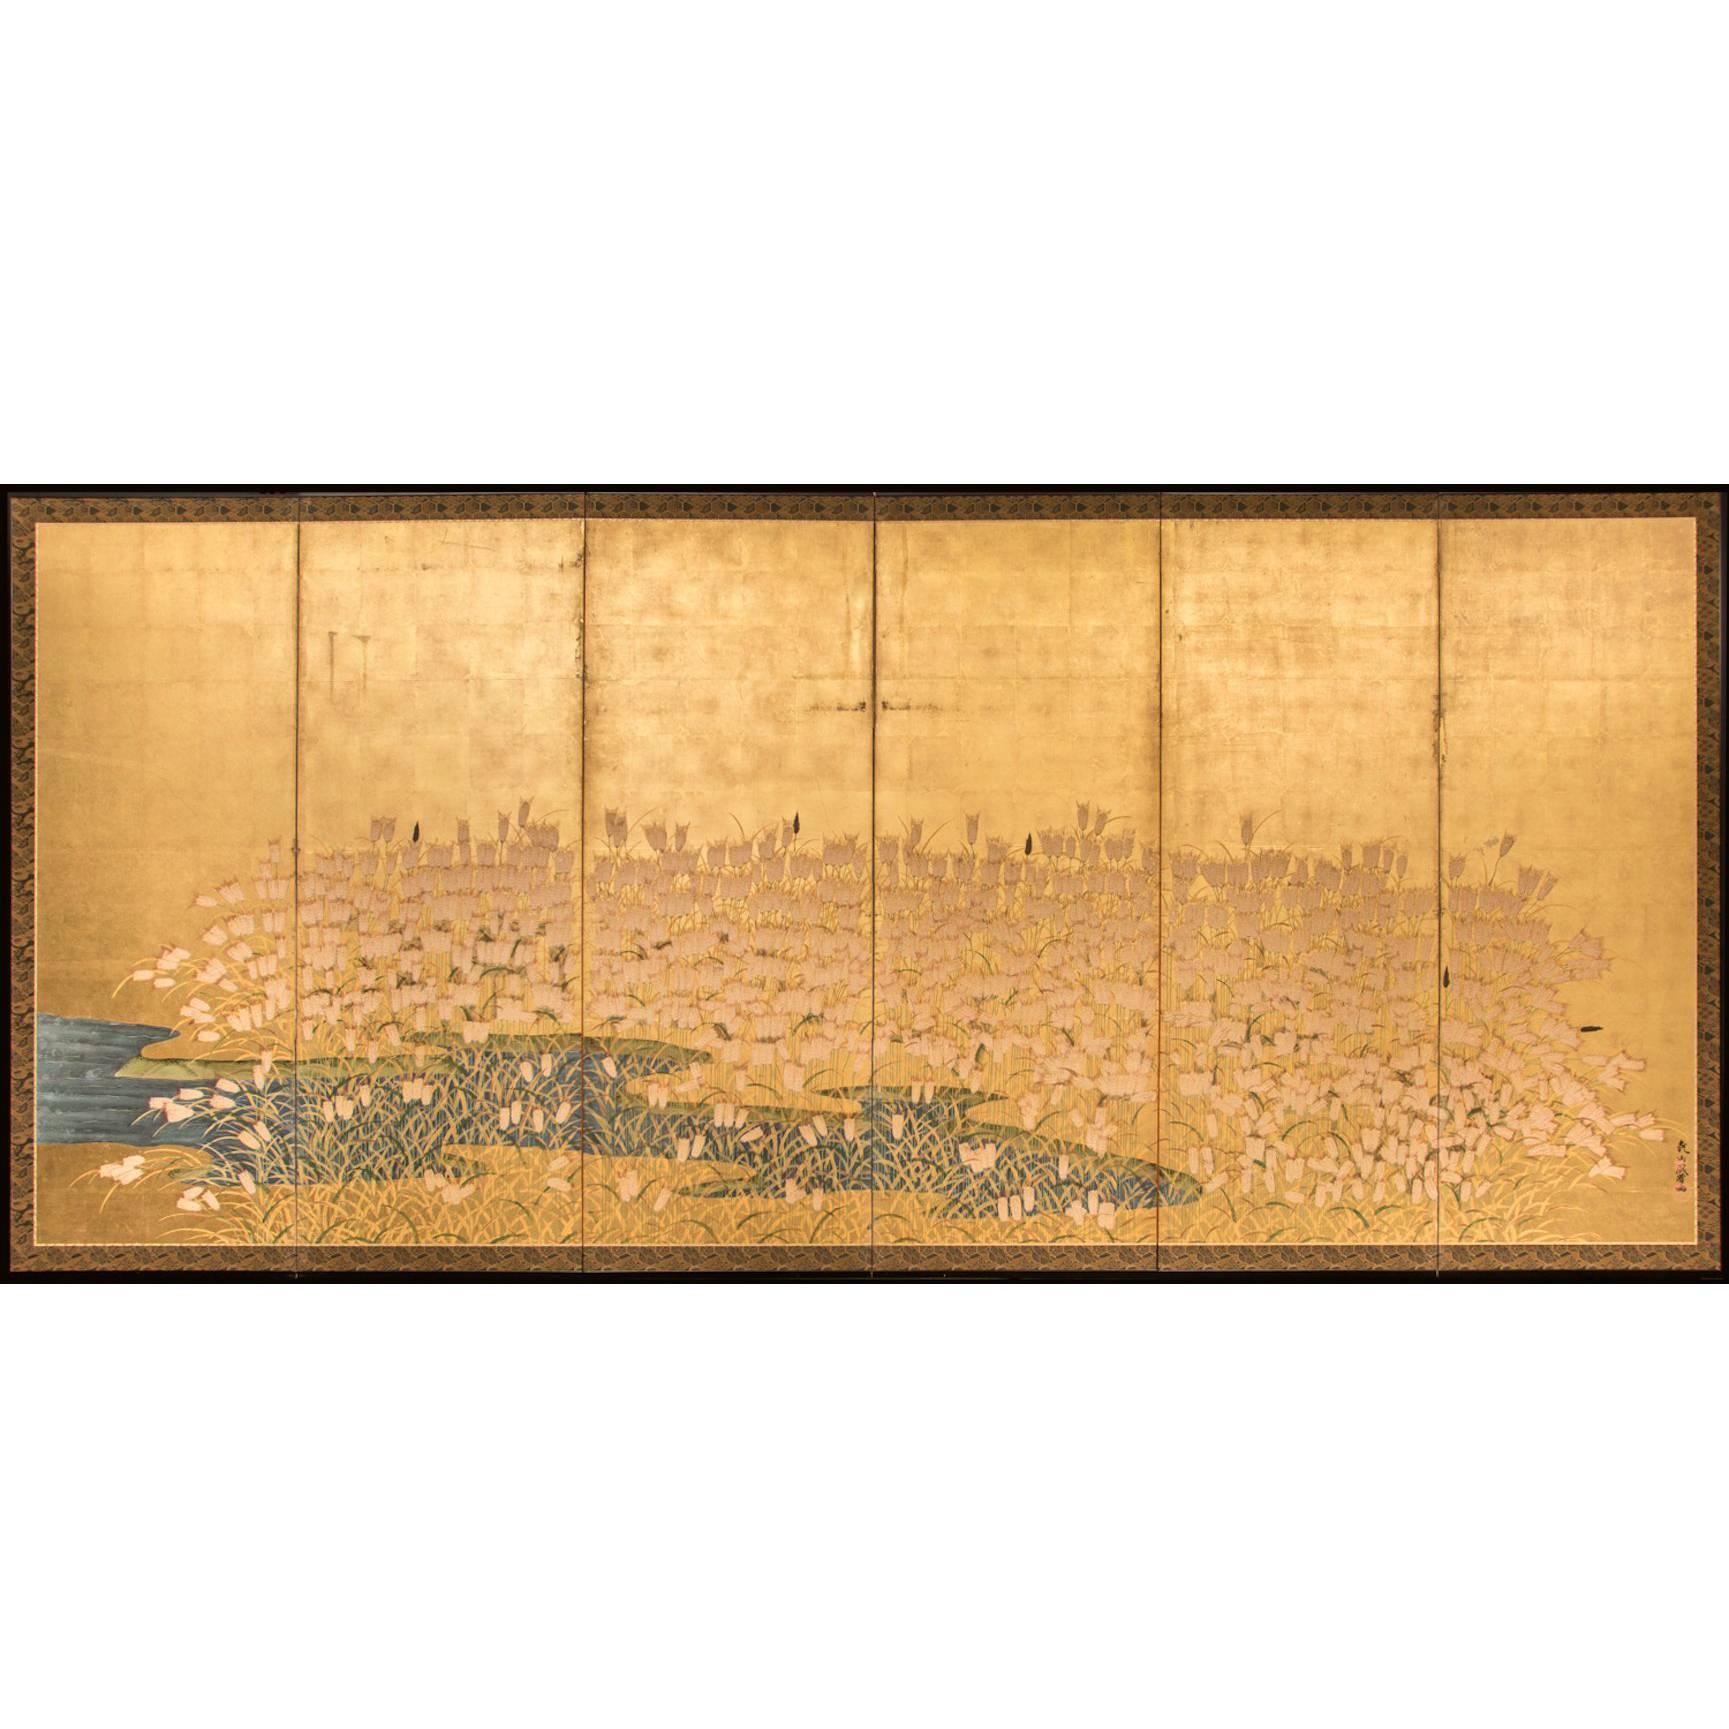 Japanese Six-Panel Screen: Field of Wheat by River's Edge